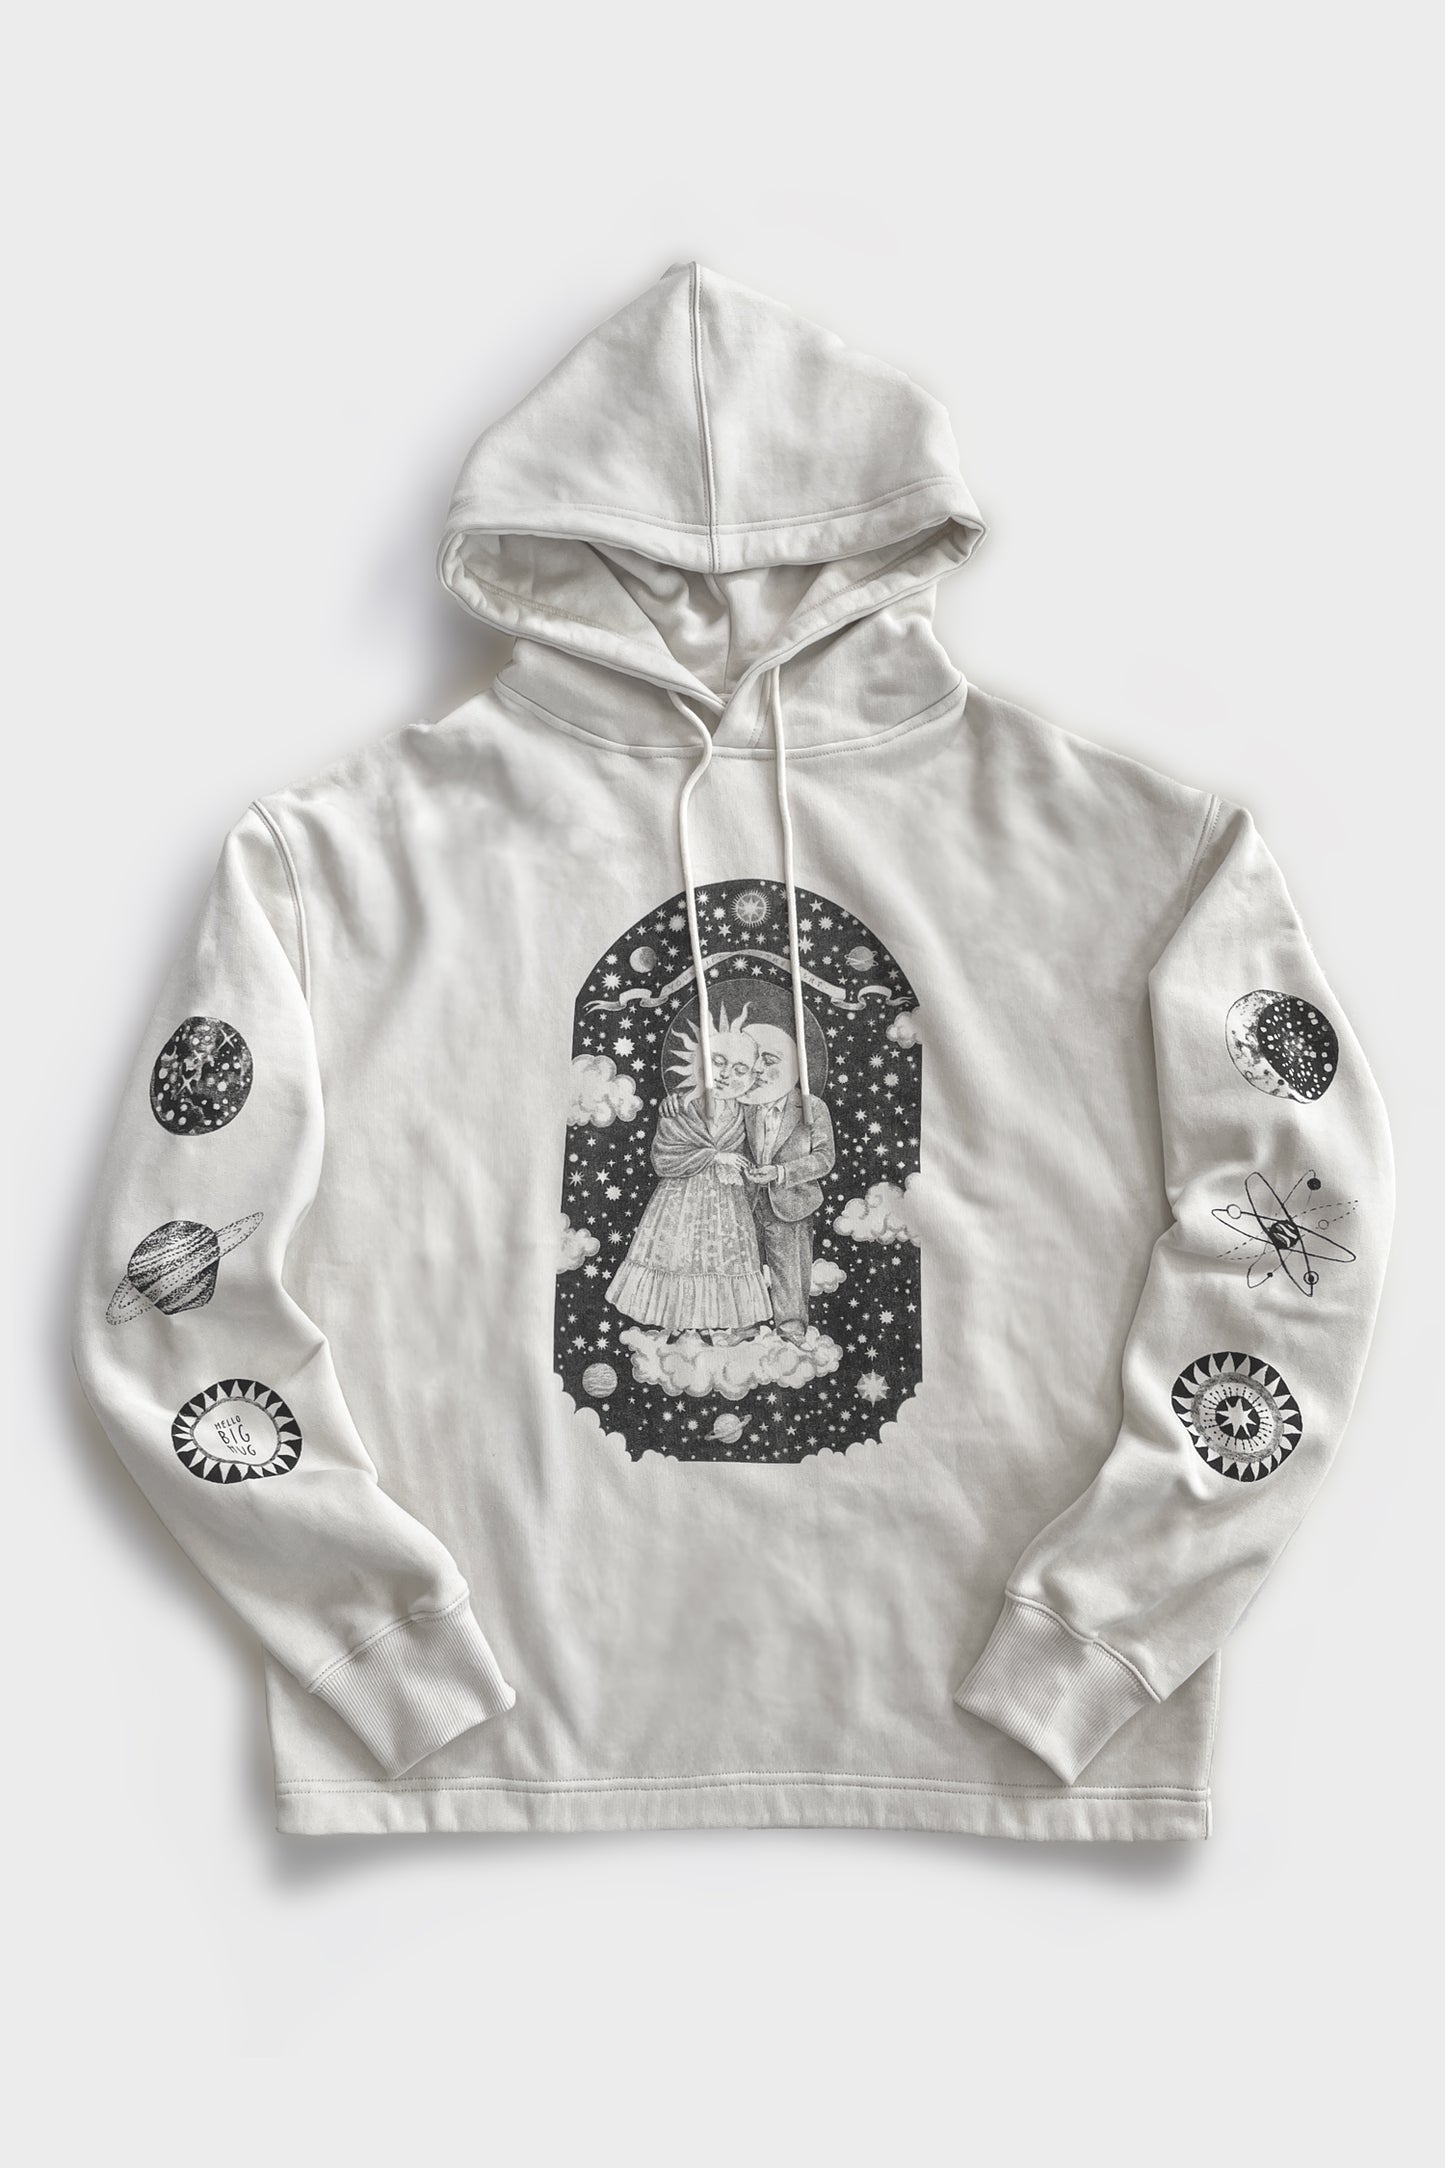 "Yours Is the Light" Hoodie